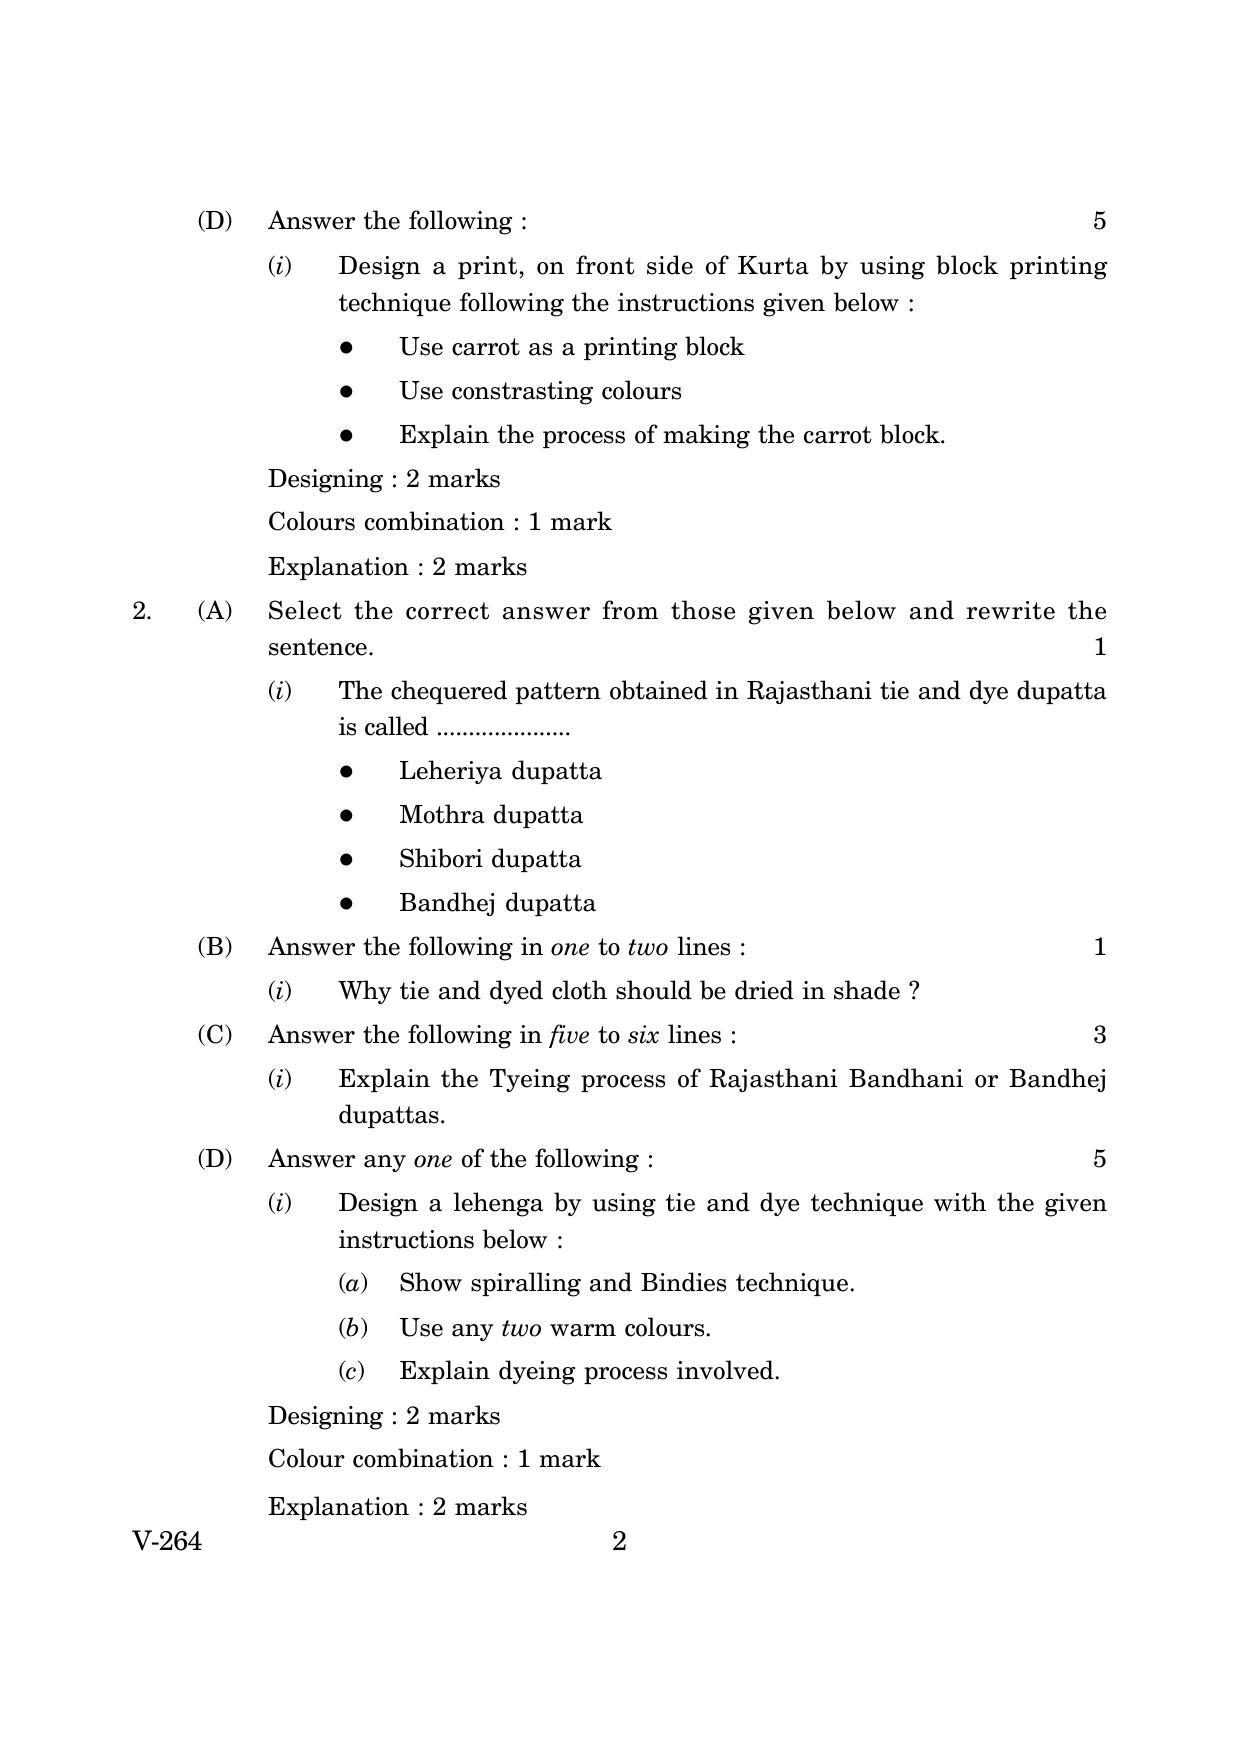 Goa Board Class 12 Dyeing and printing   (March 2019) Question Paper - Page 2